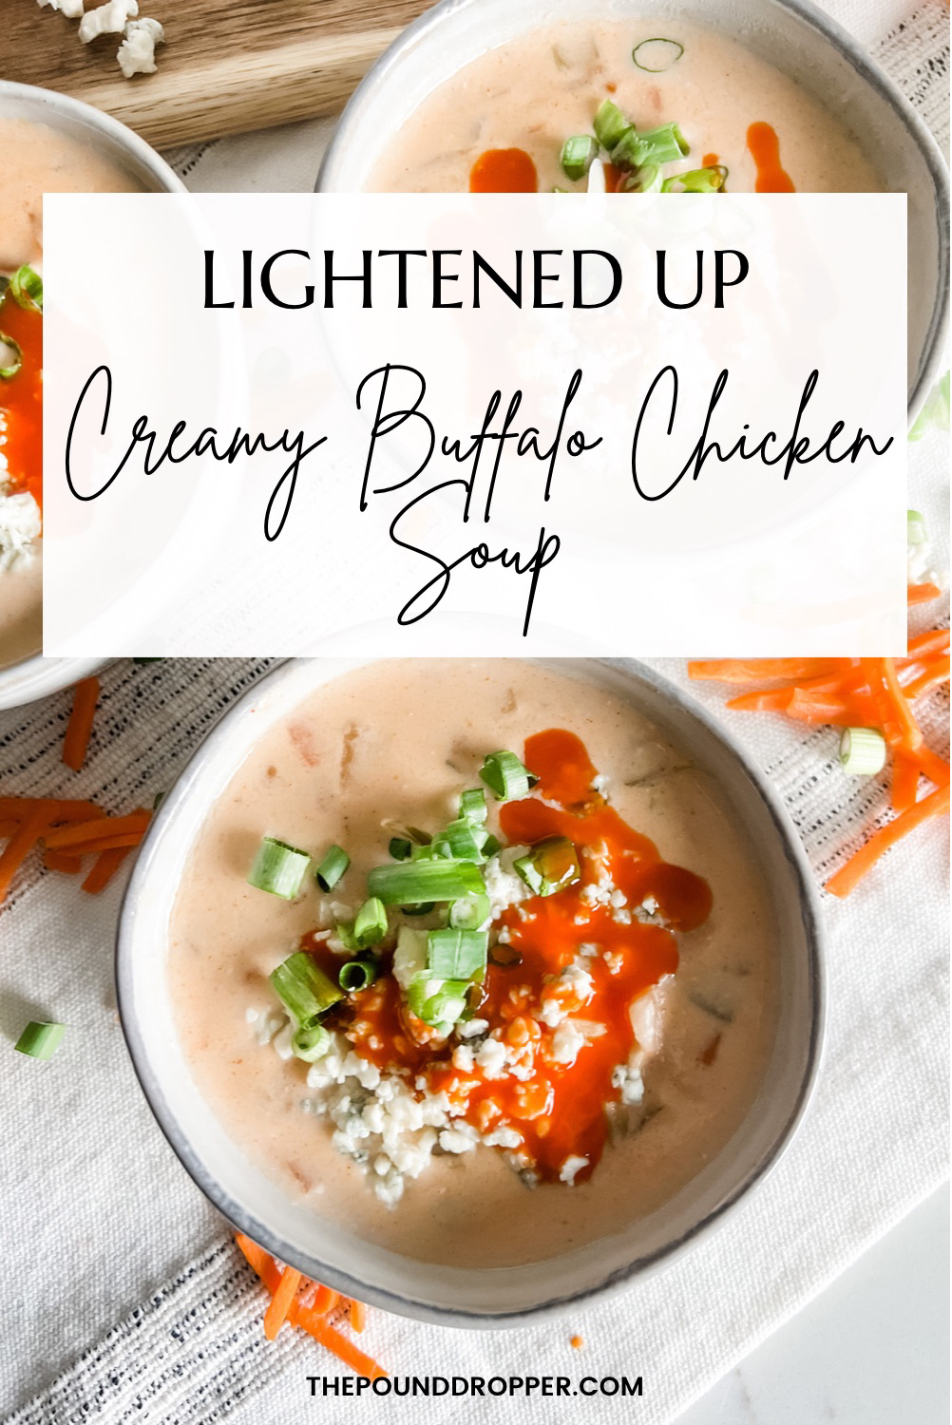 Who needs hot wings-when you can have this Lightened Up Creamy Buffalo Chicken Soup! This soup will be your new favorite chicken soup recipe-packed with chicken, veggies, ranch seasoning, light cream cheese, and wing sauce! via @pounddropper